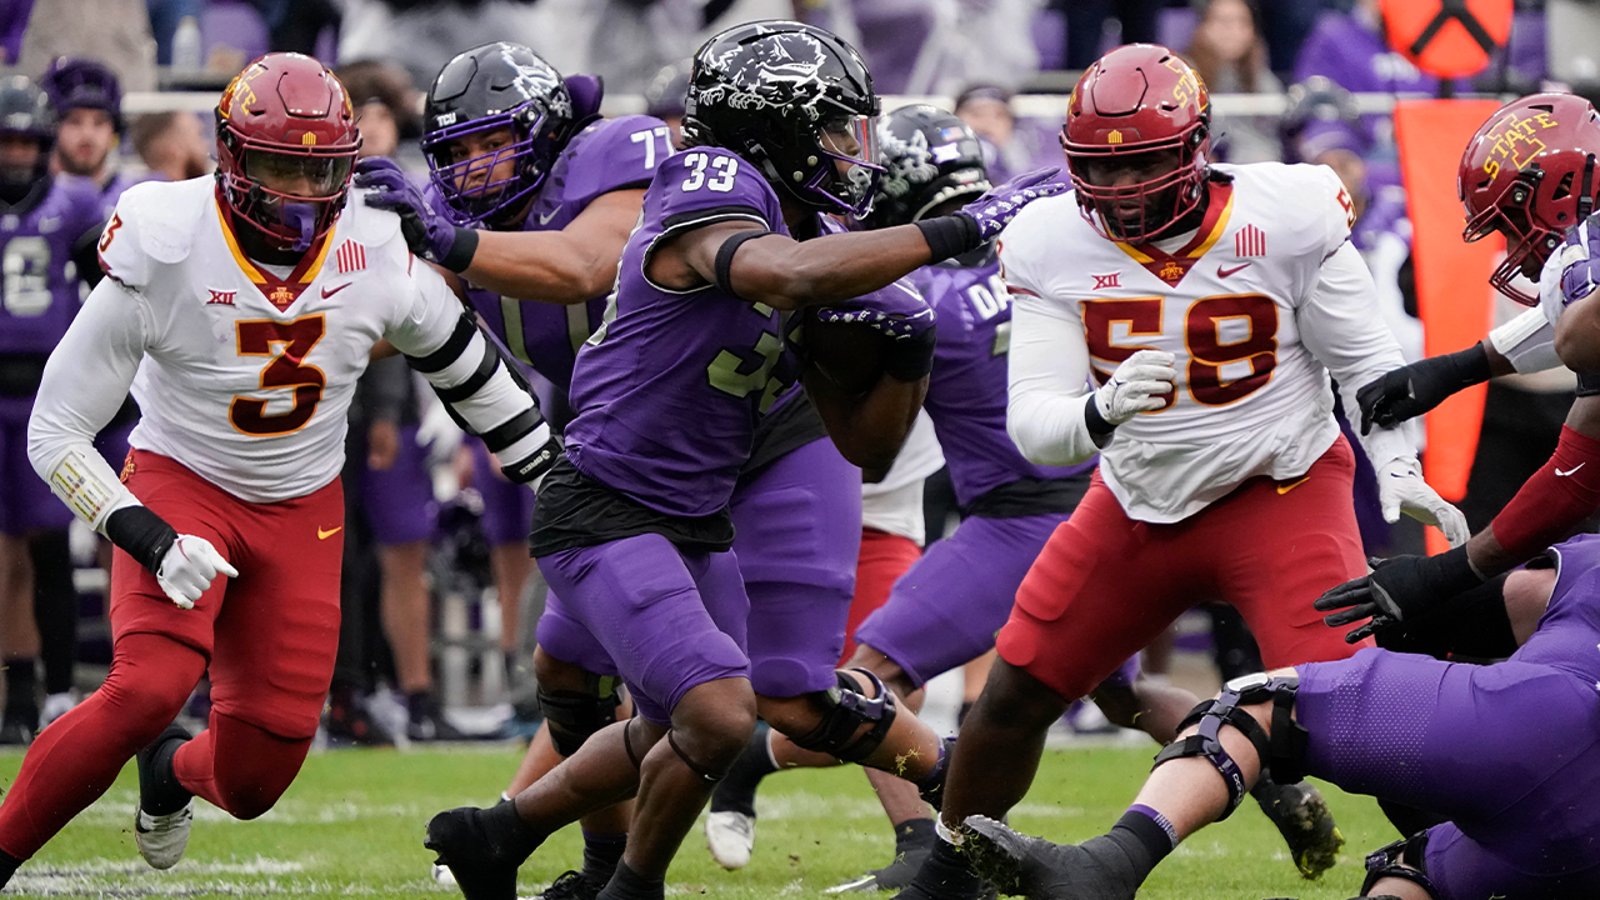 Highlights: TCU takes care of business vs. Iowa State